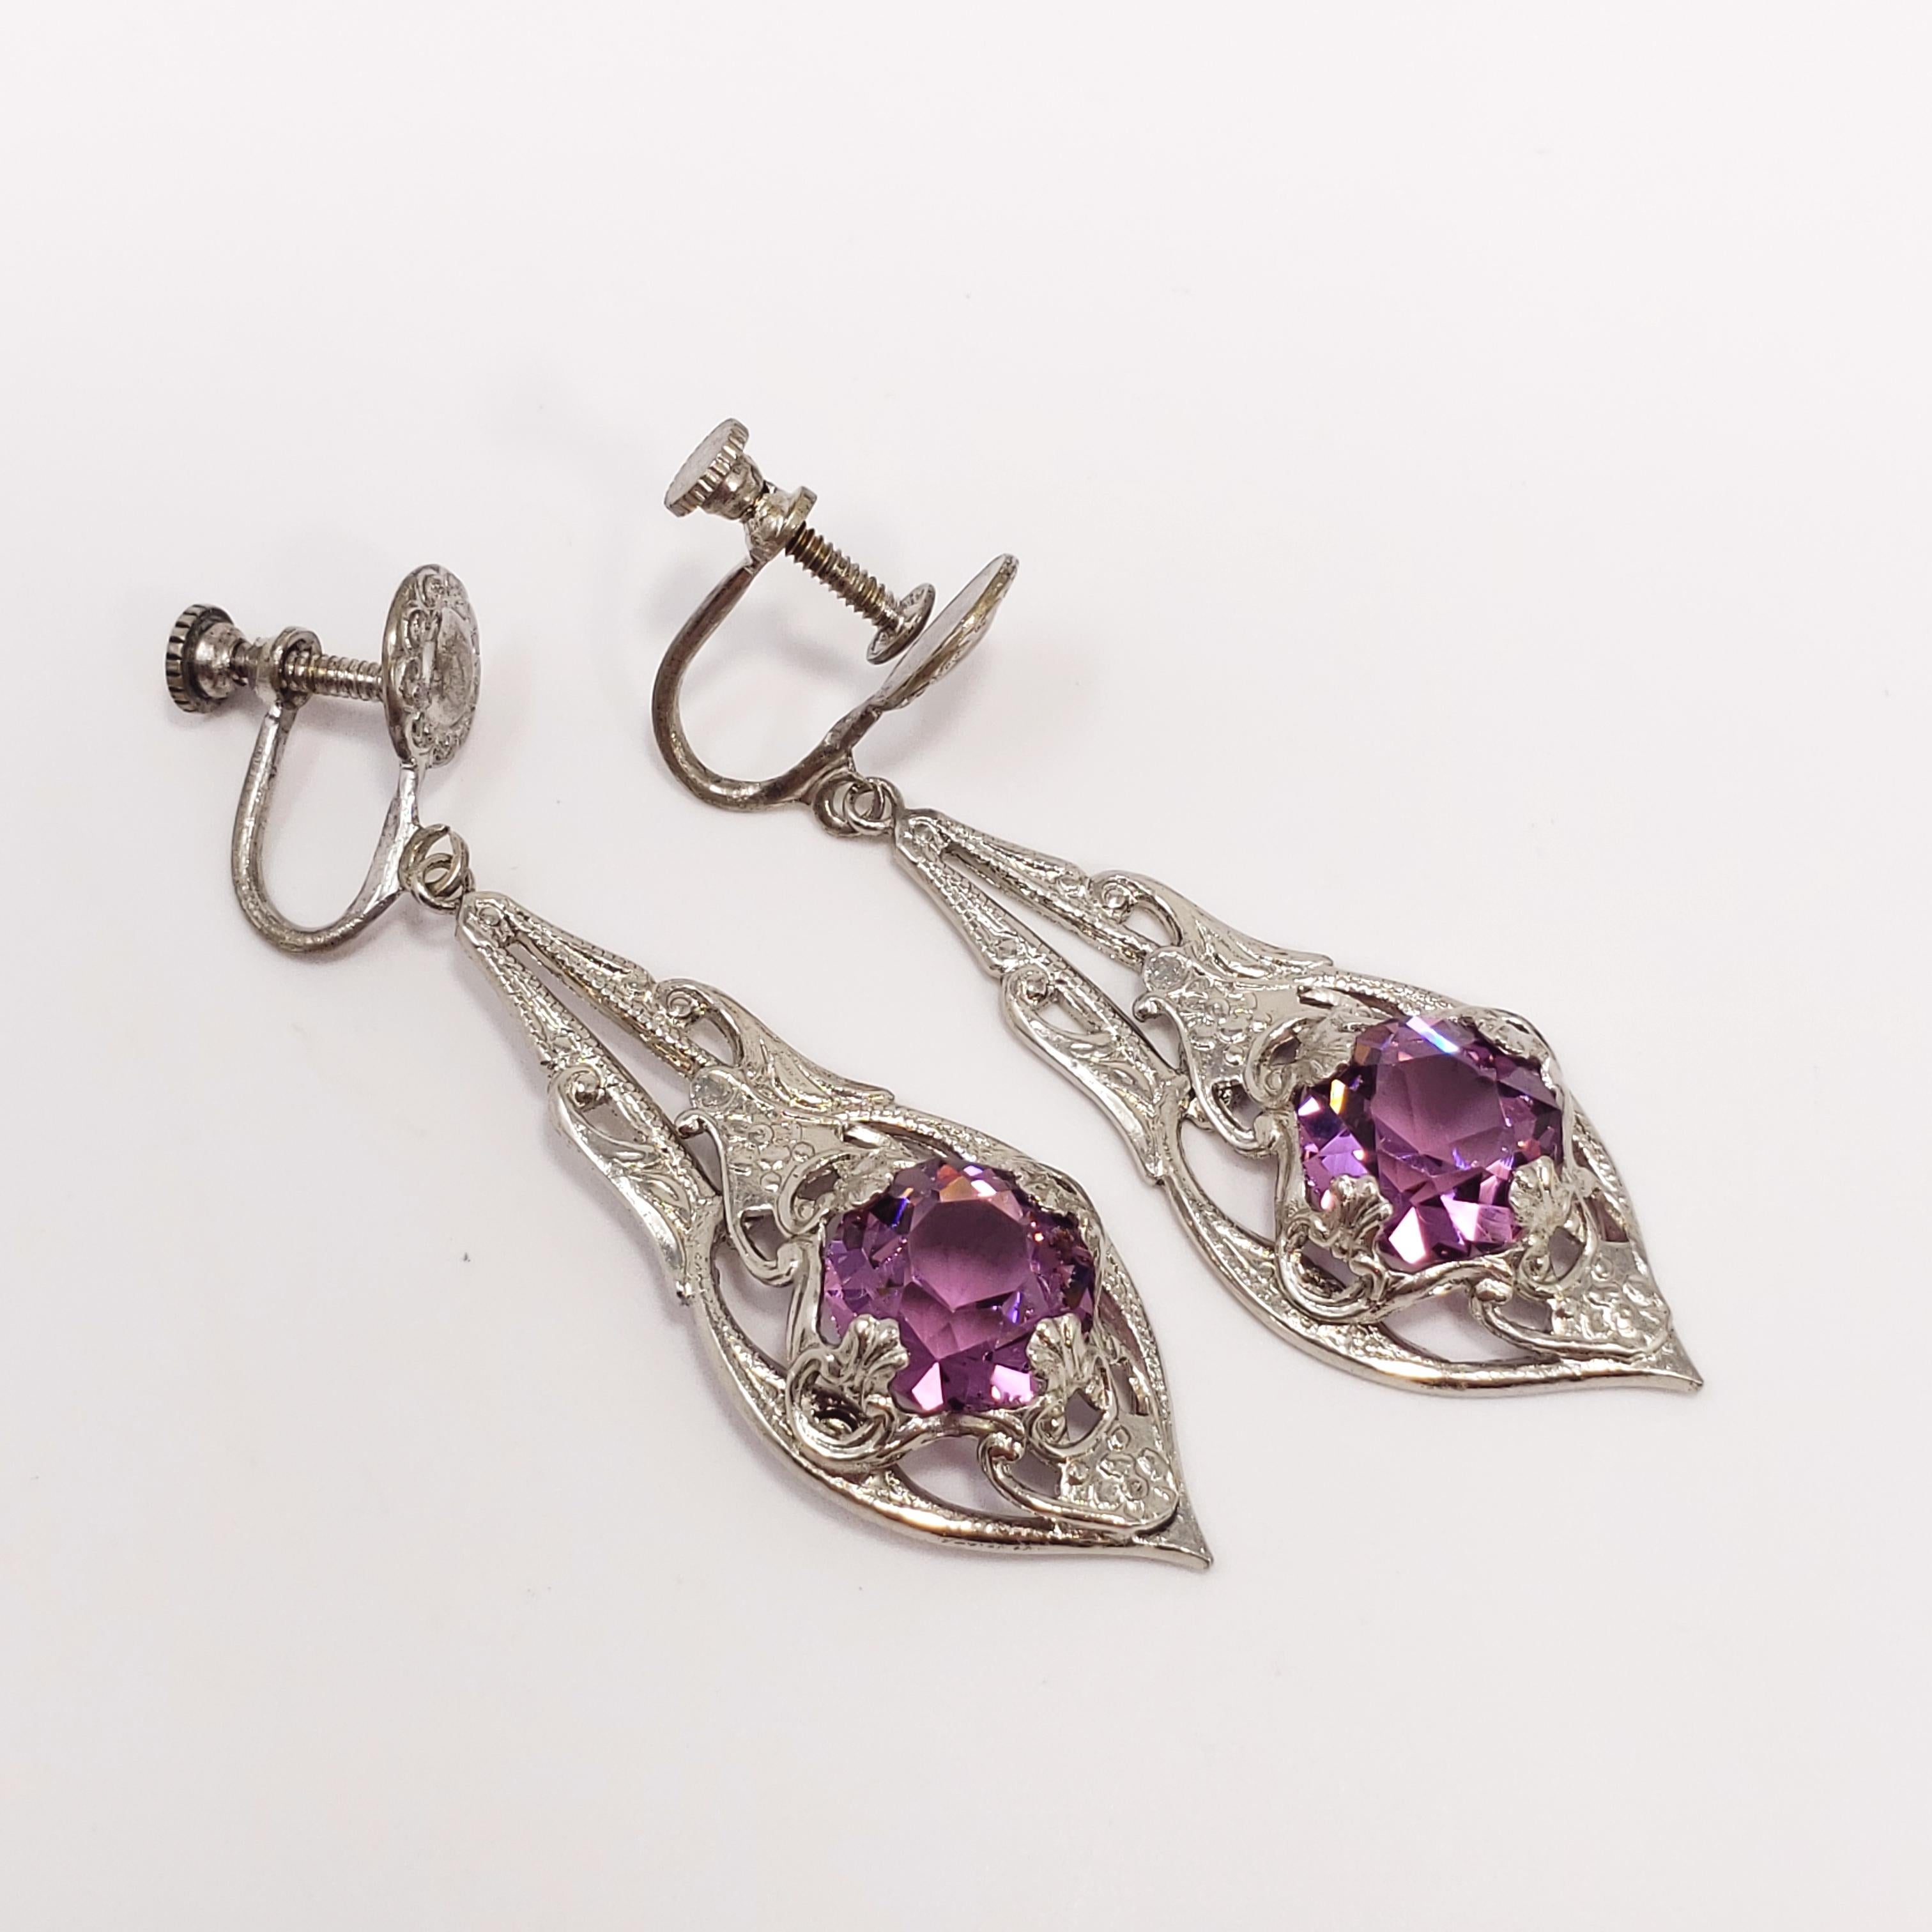 A pair of exquisite, antique, dangle earrings. The faceted, amethyst-colored crystals are prong set in an ornate, art-nouveau, silverplated metal setting. Feature antique screw back hardware. The expertly-cut crystals and .800 silver plating give